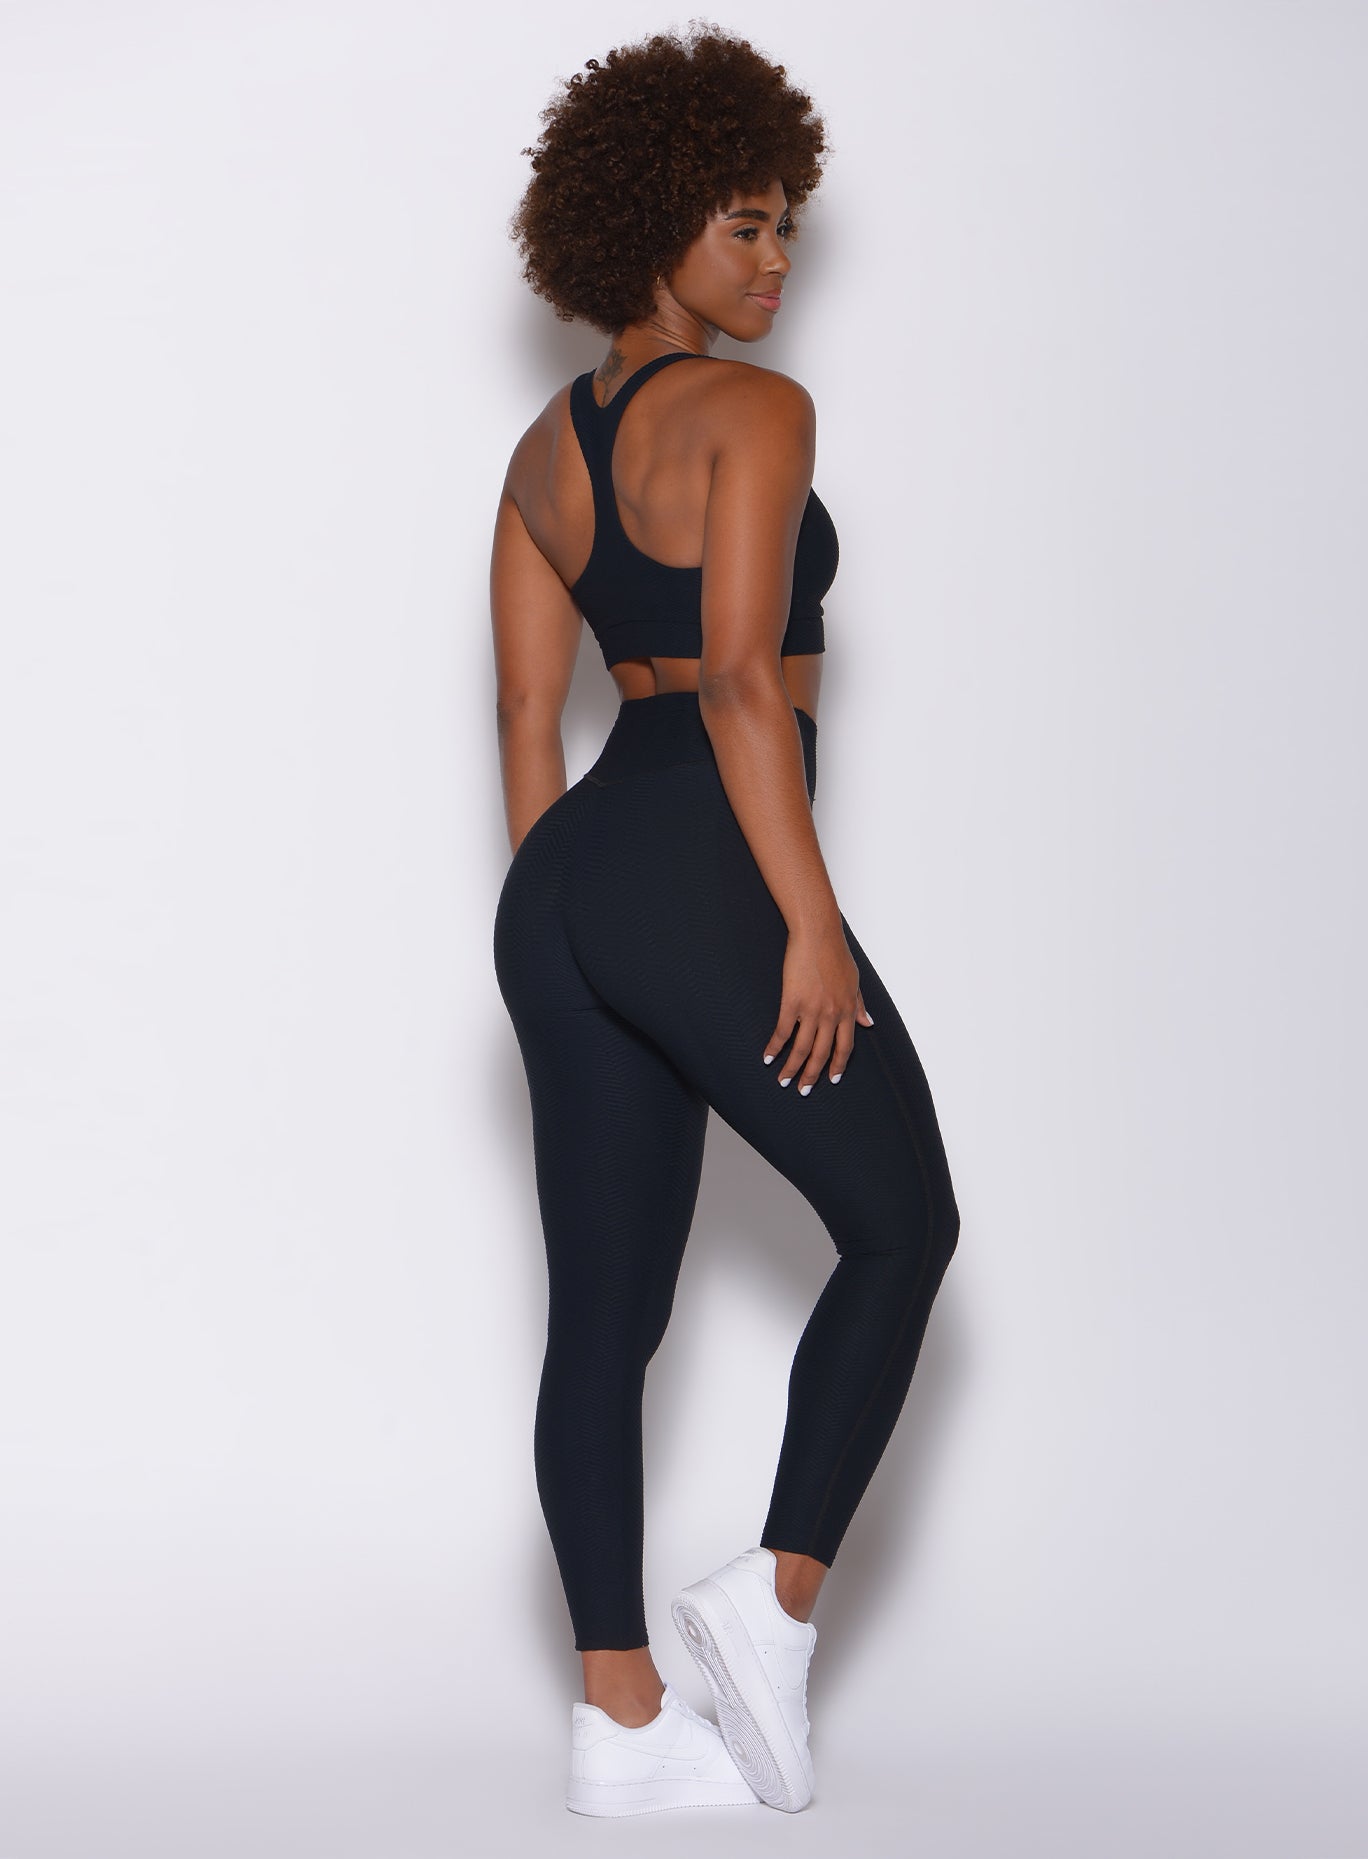 right side profile view of a model in our Chevron Leggings in jet black color and matching bra